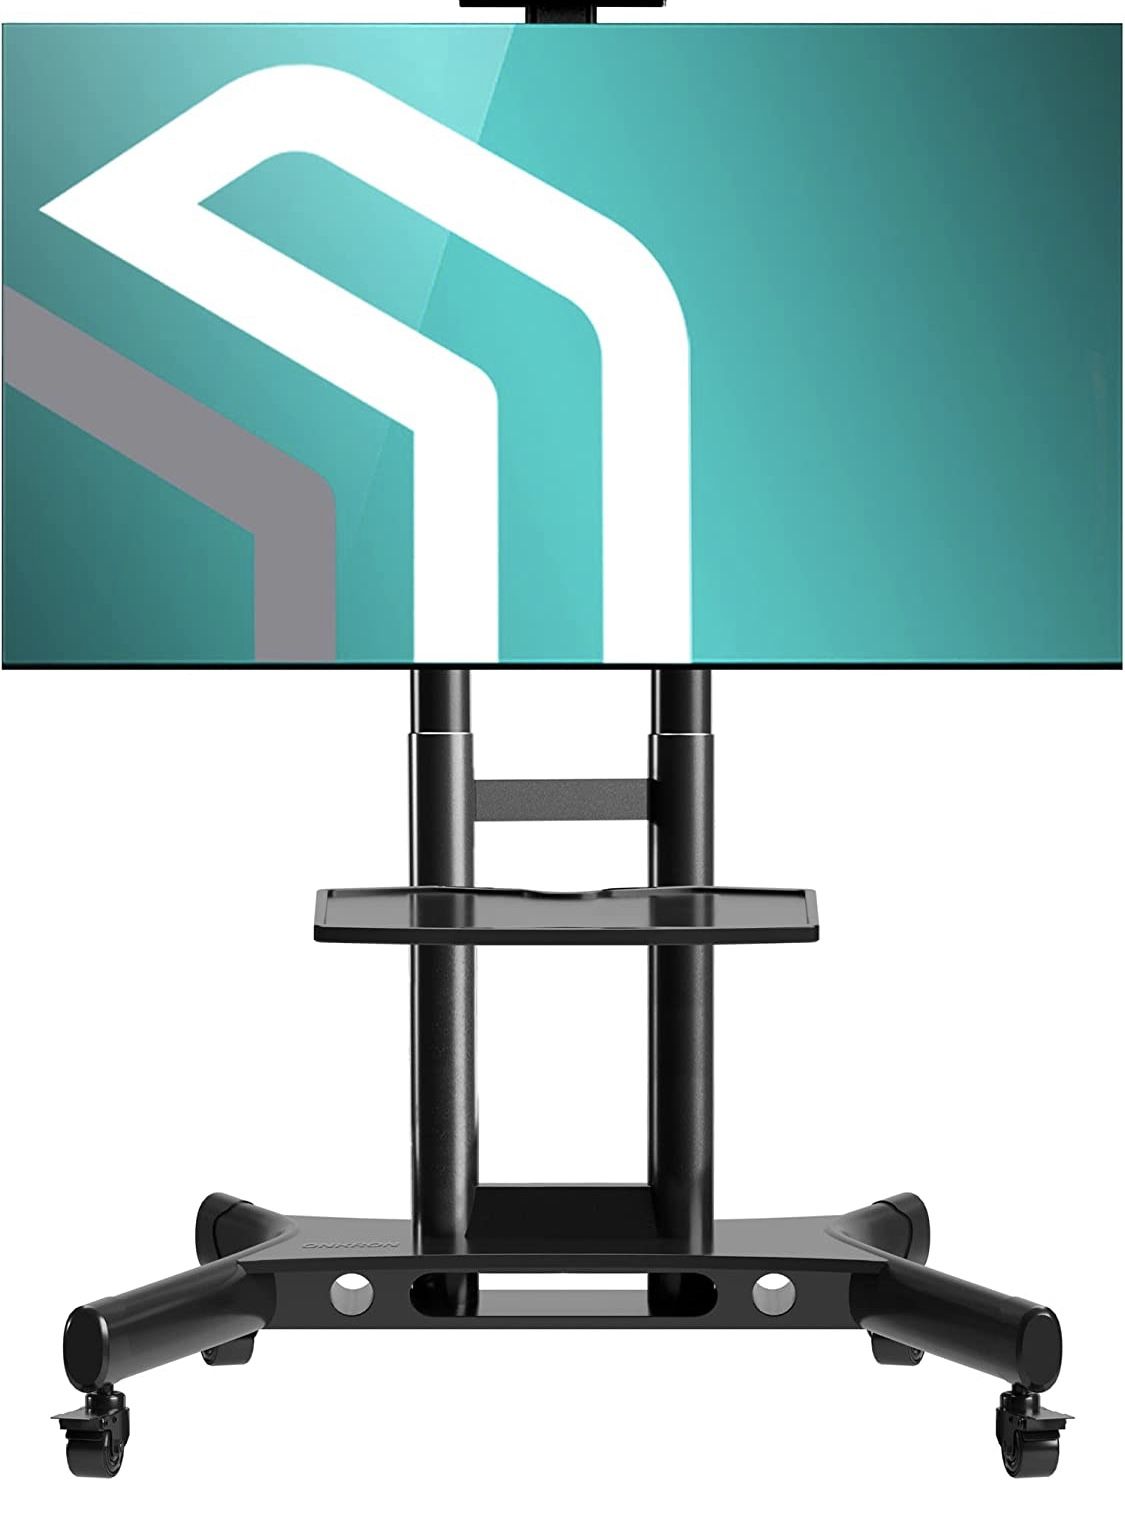 ONKRON Portable TV Stand with Wheels - Rolling Adjustable TV Stand for 40-70 Inch Screens Flat & Curved - Mobile TV Stand for TVs up to 100 lbs - Roll